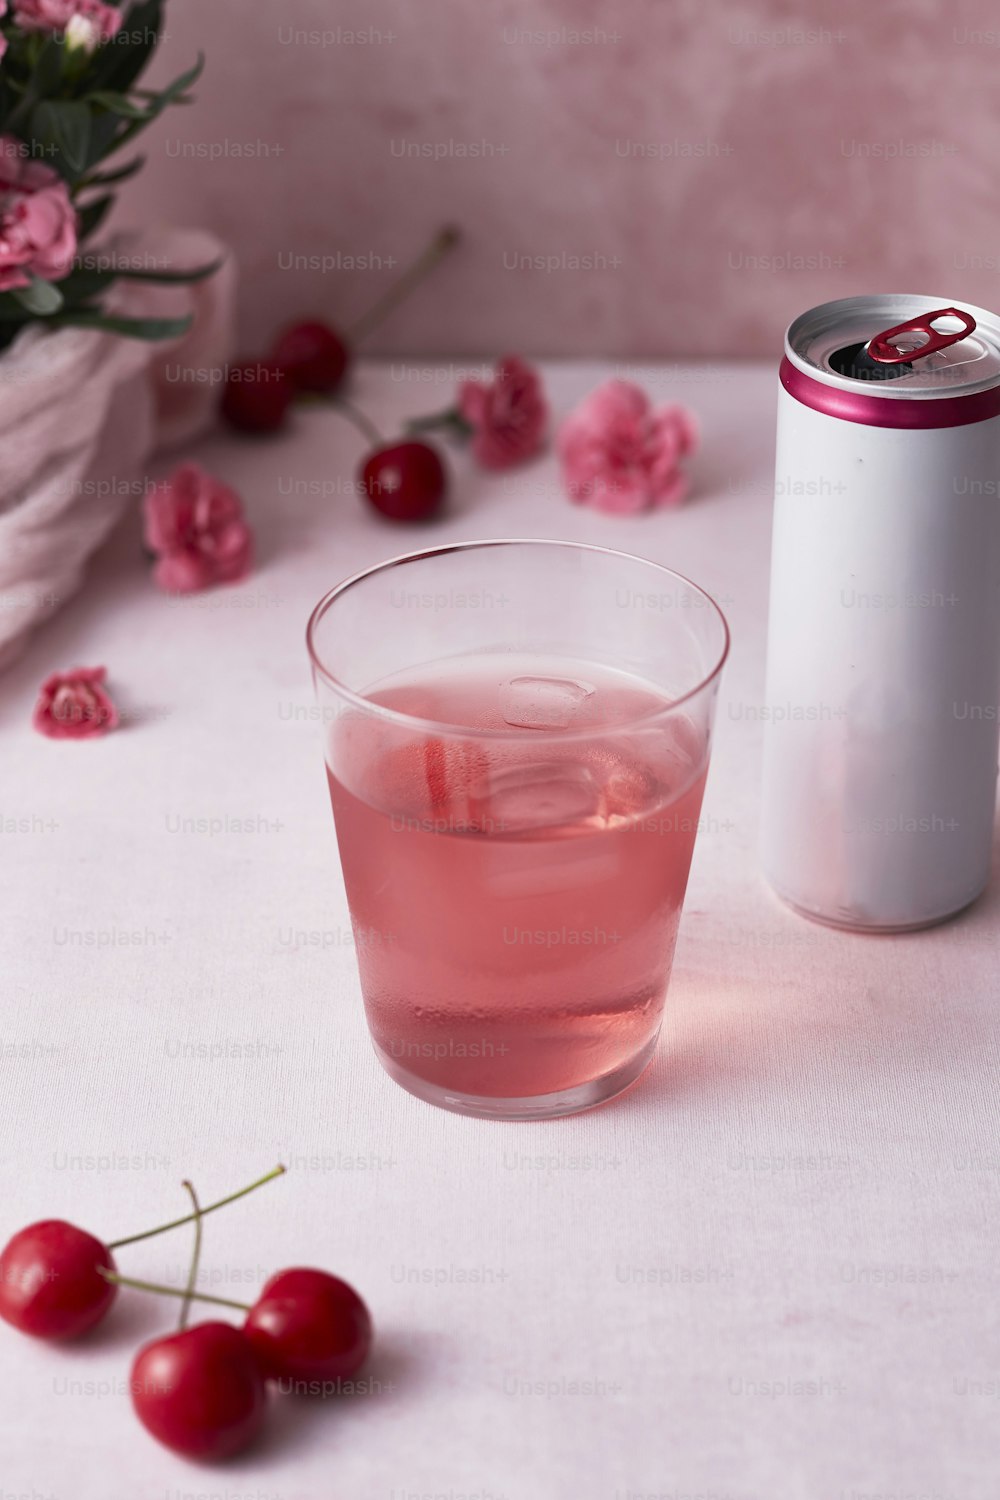 a glass of pink liquid next to a can of soda